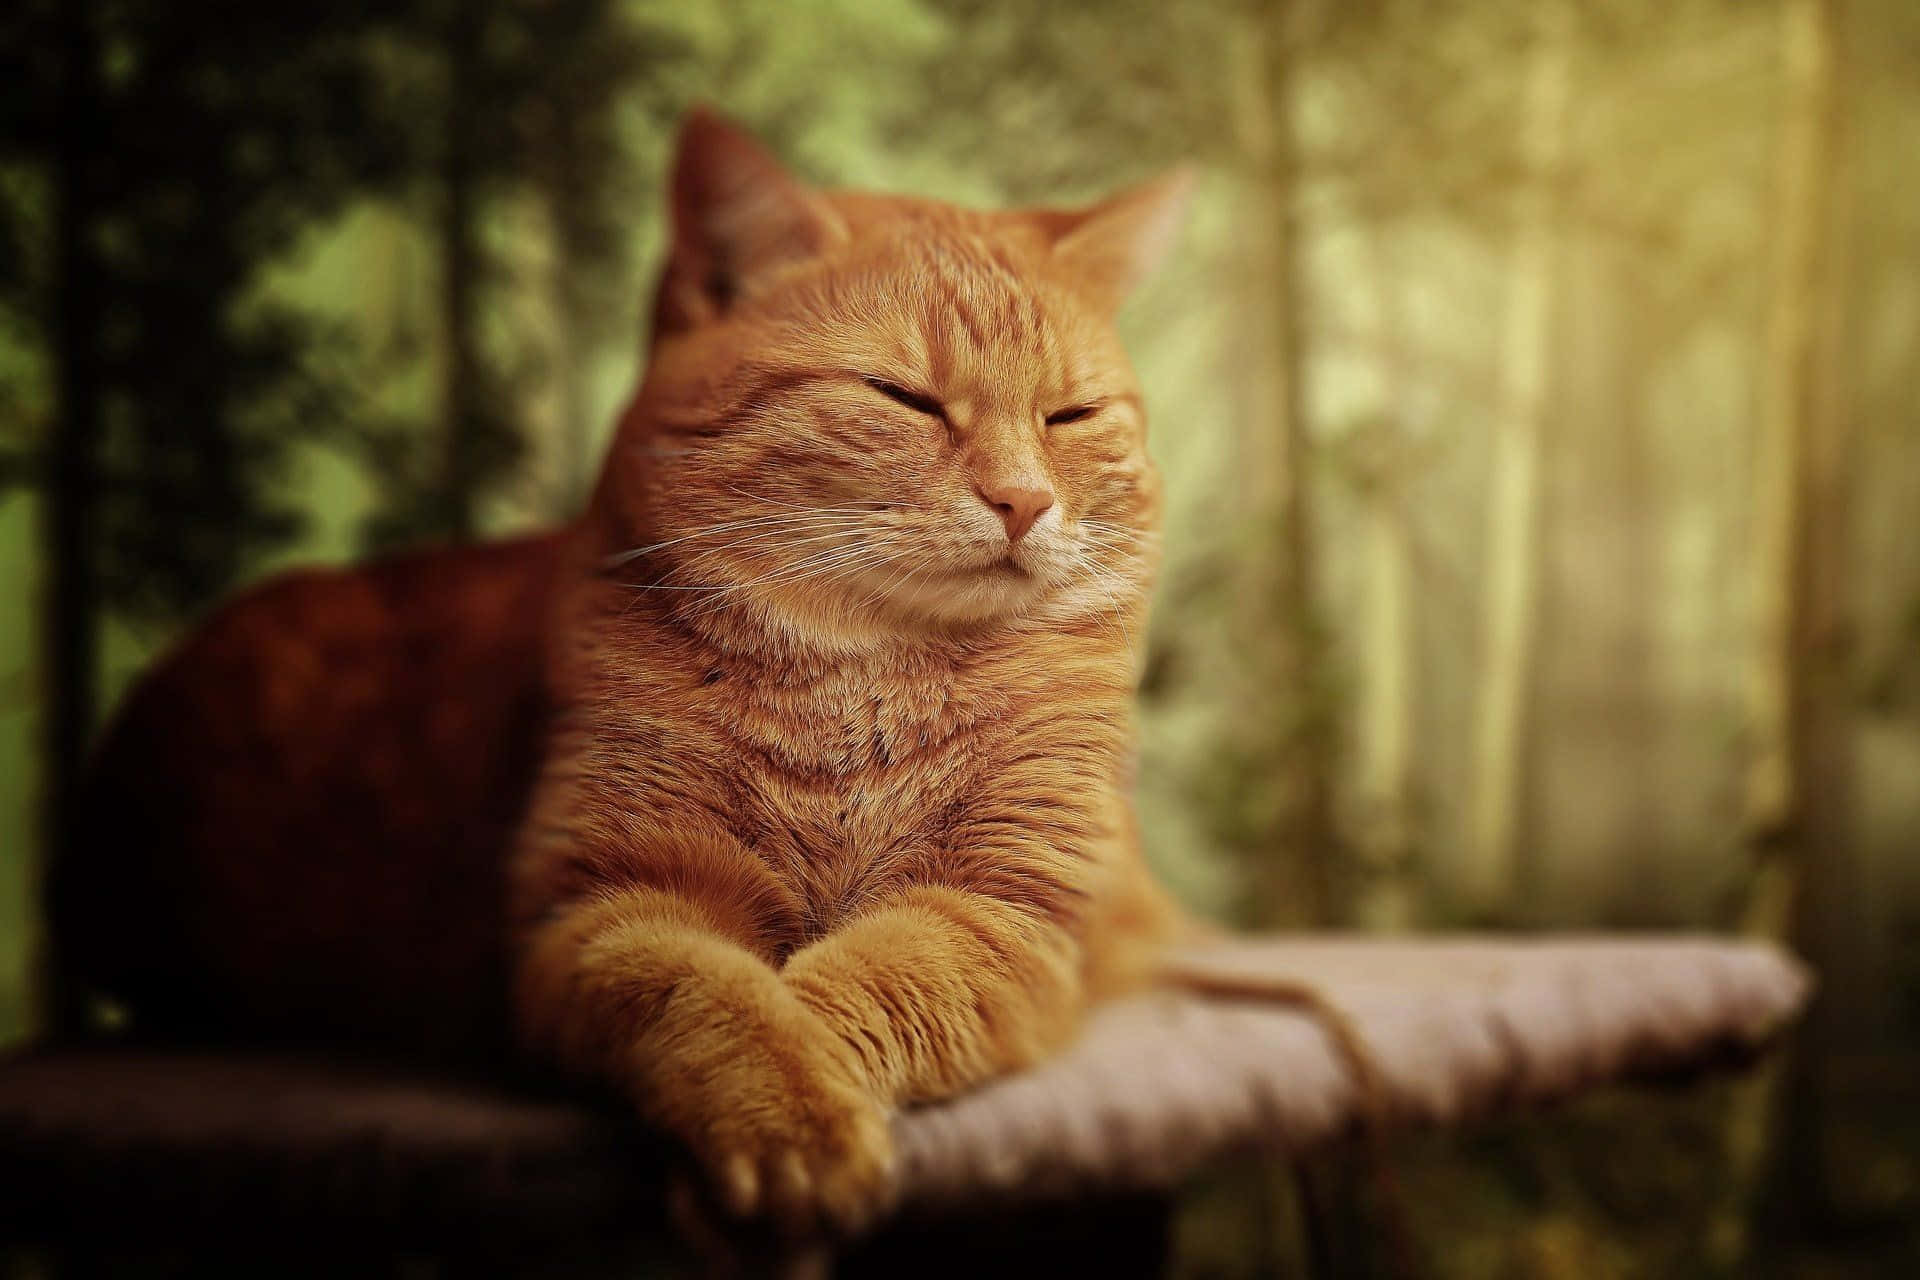 Caption: A Tranquil Ginger Cat Relishing Its Solitude